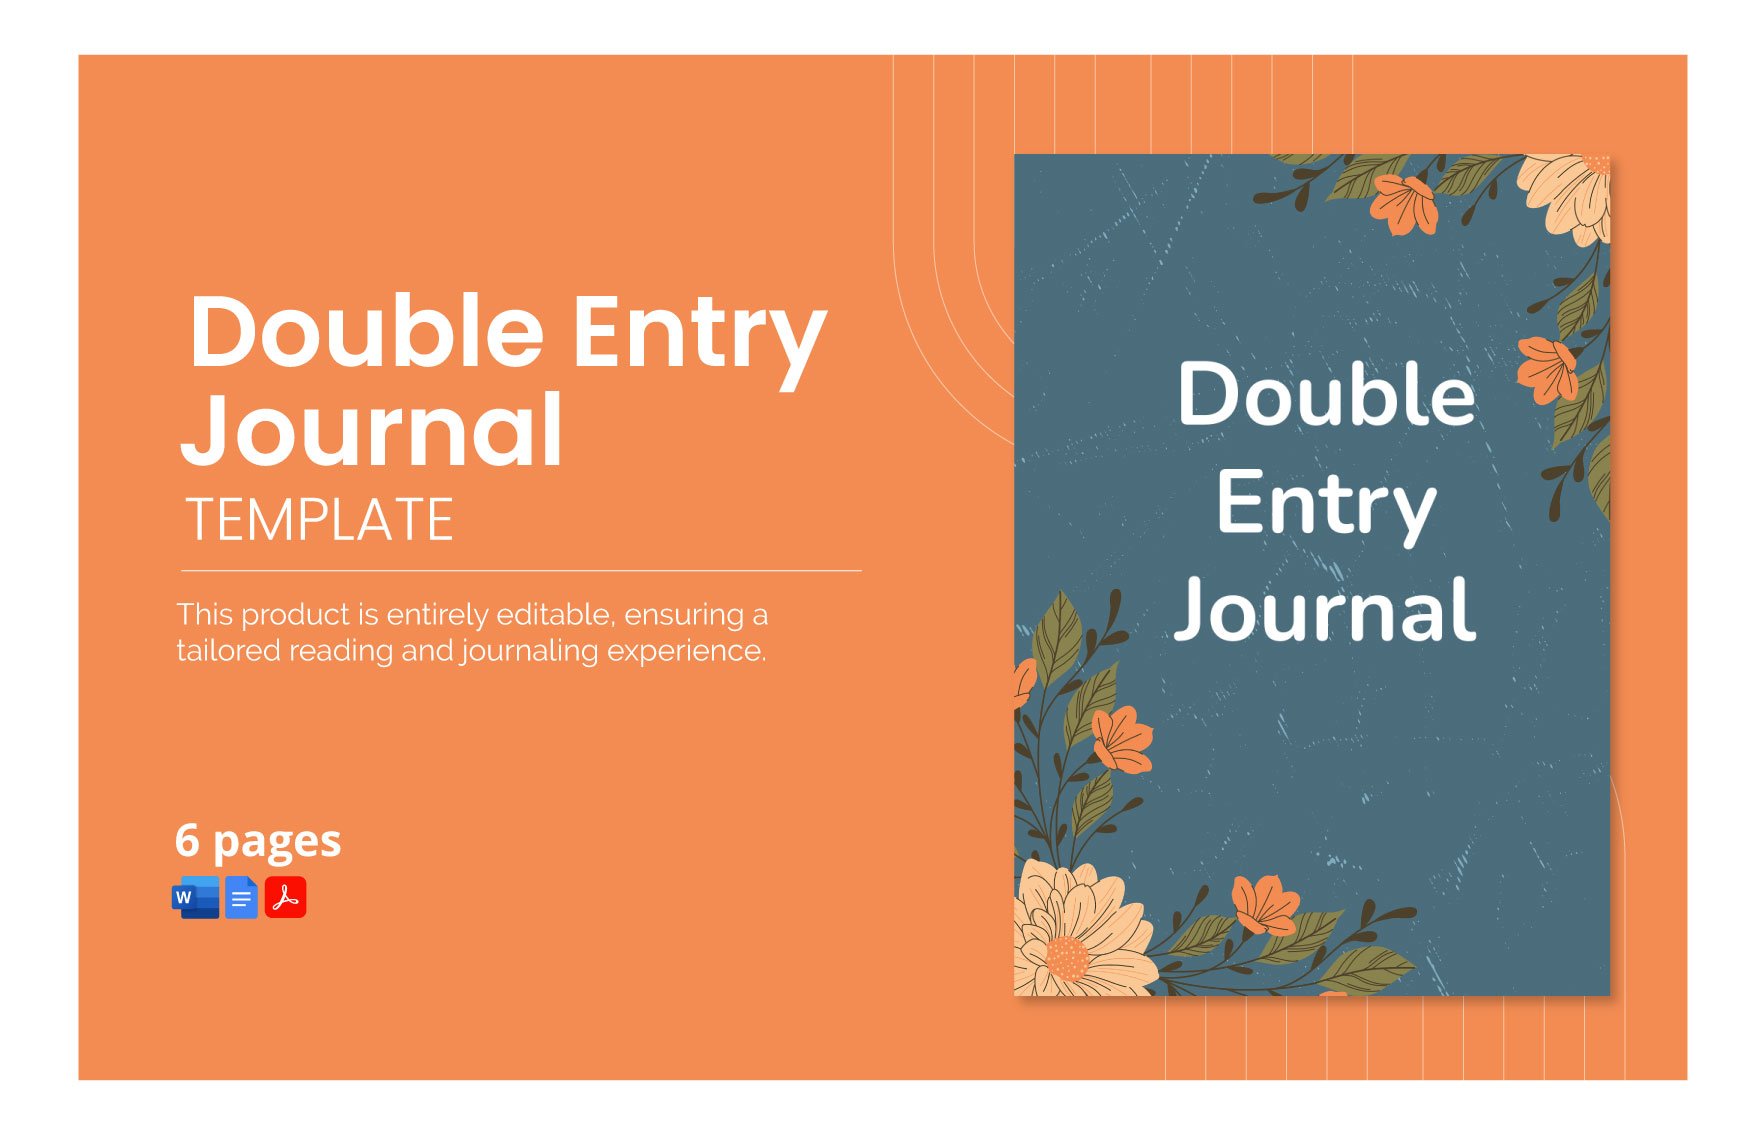 Double Entry Journal Template